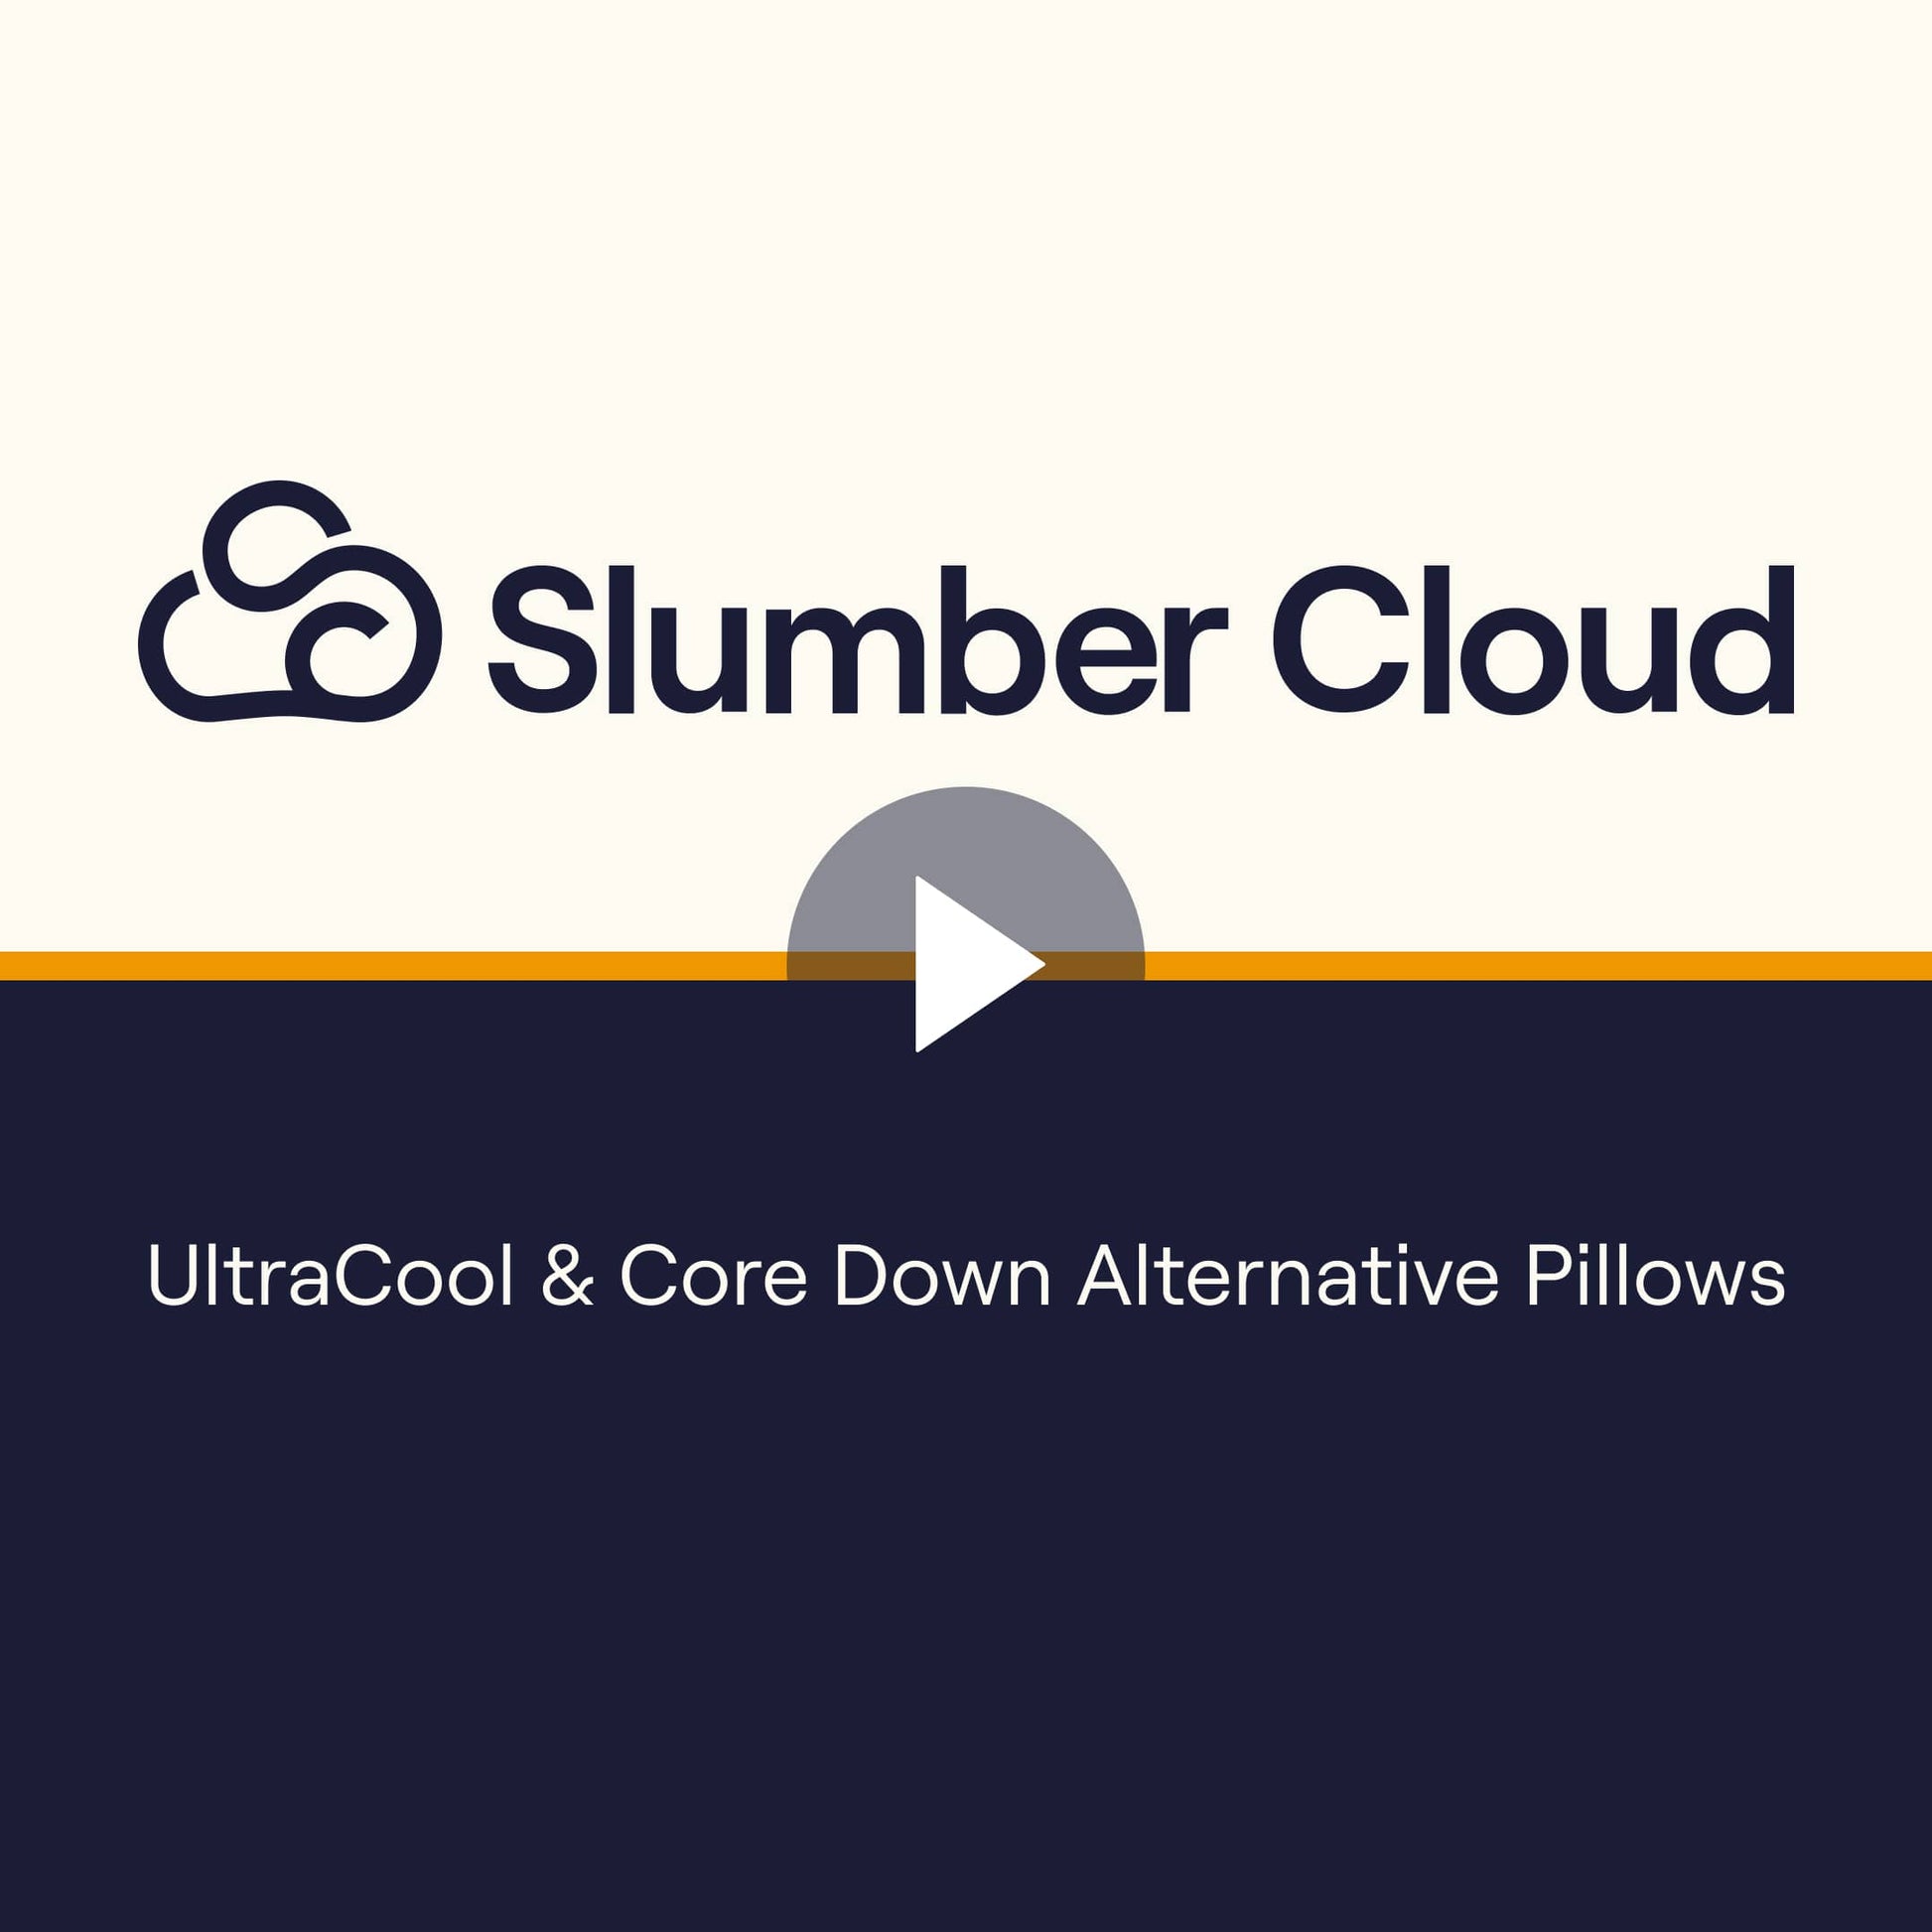 Slumber Cloud video outlining the difference between the UltraCool and Core Down Alternative Pillows withOutlast Technology